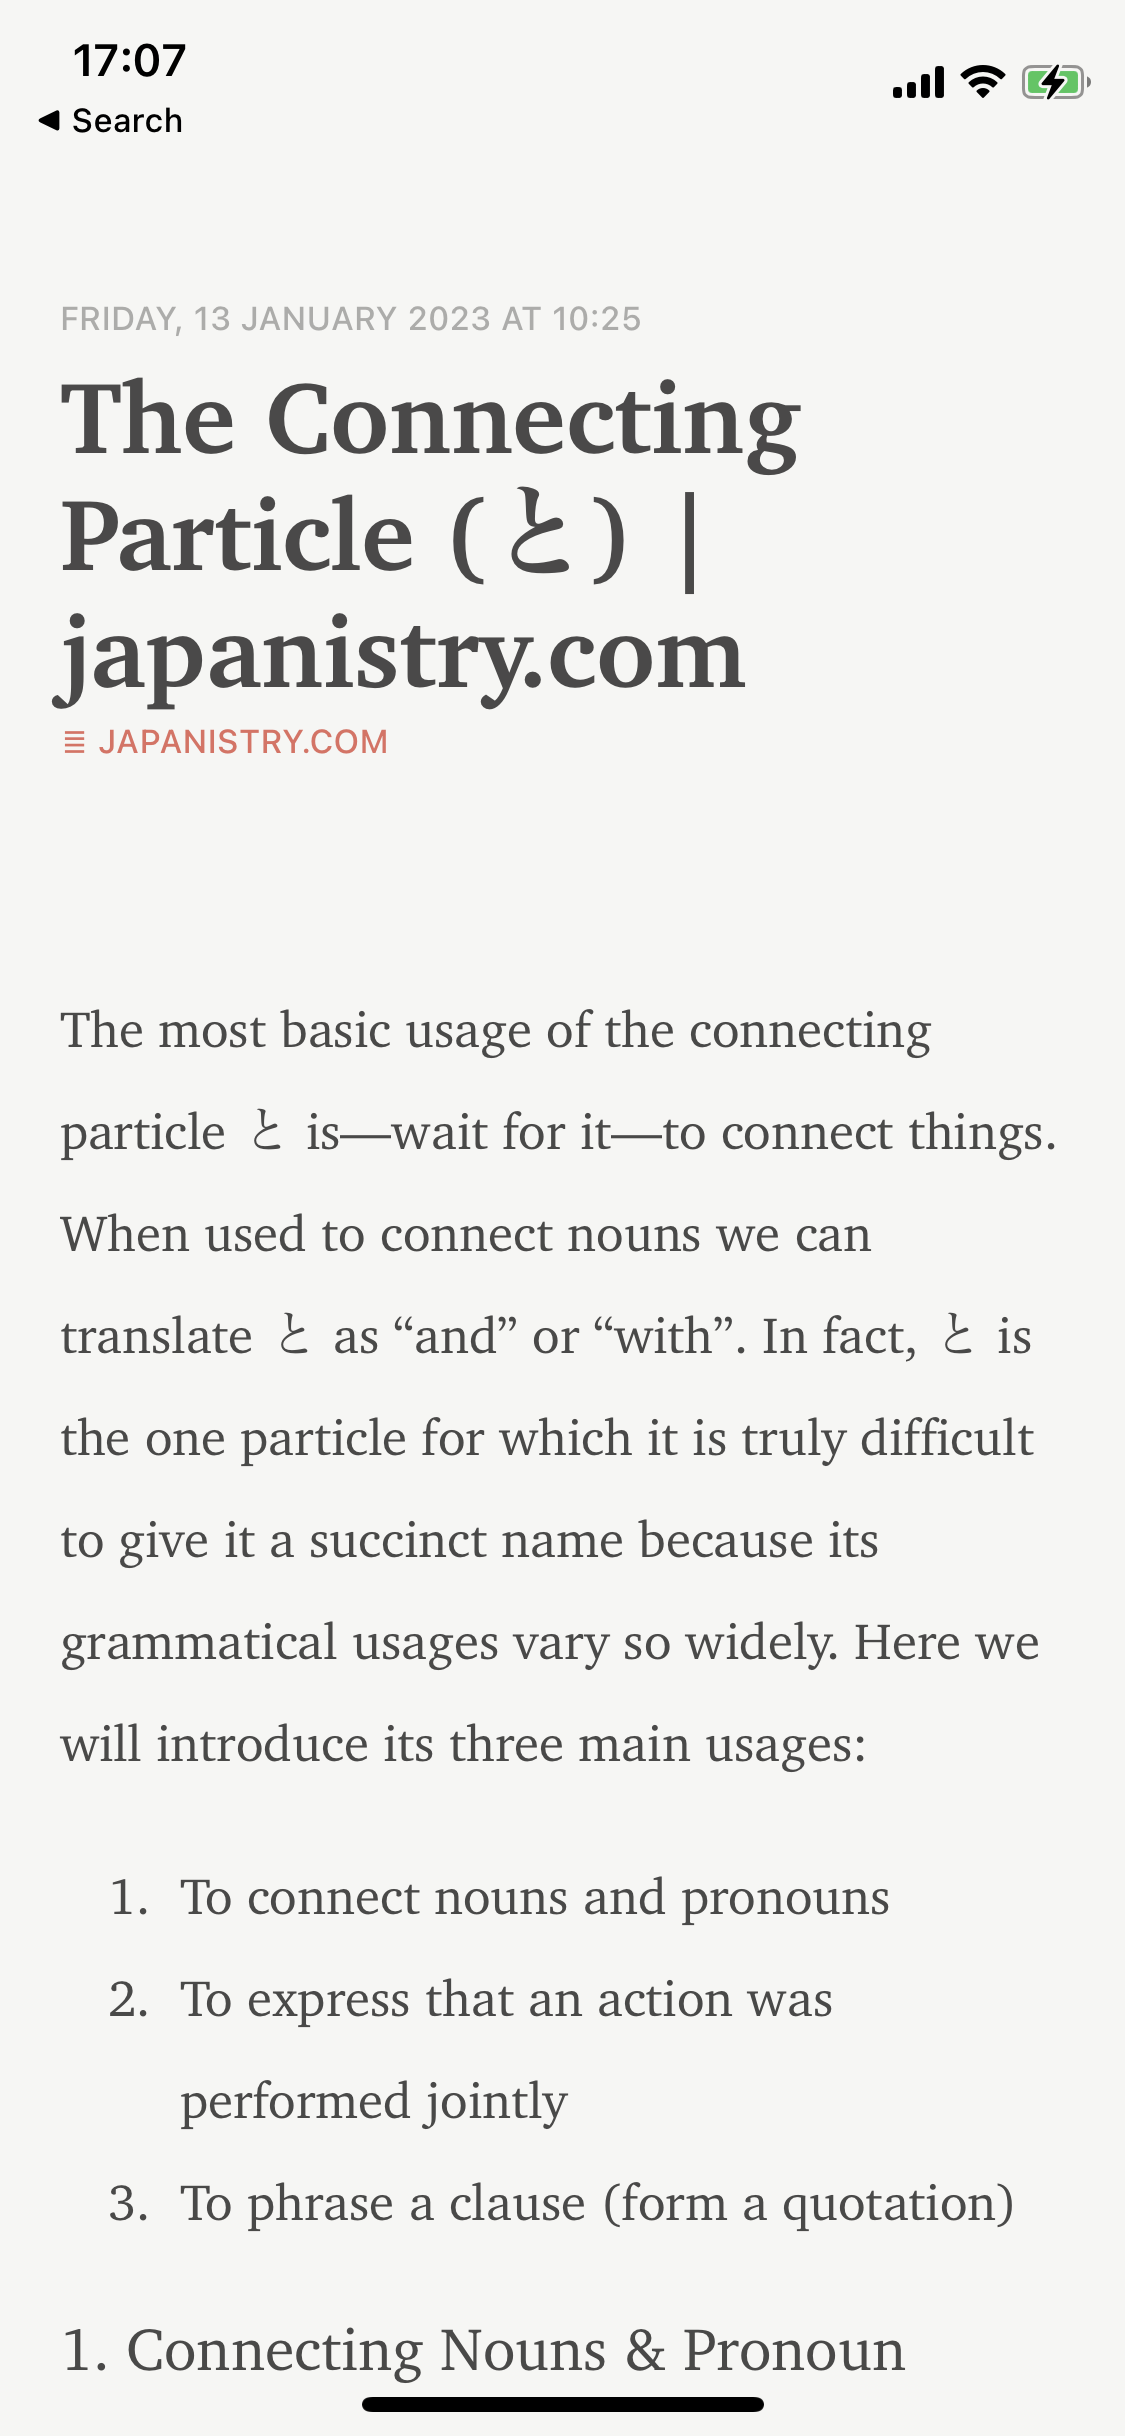 Reeder had no trouble parsing the content of this Japanese grammar article.